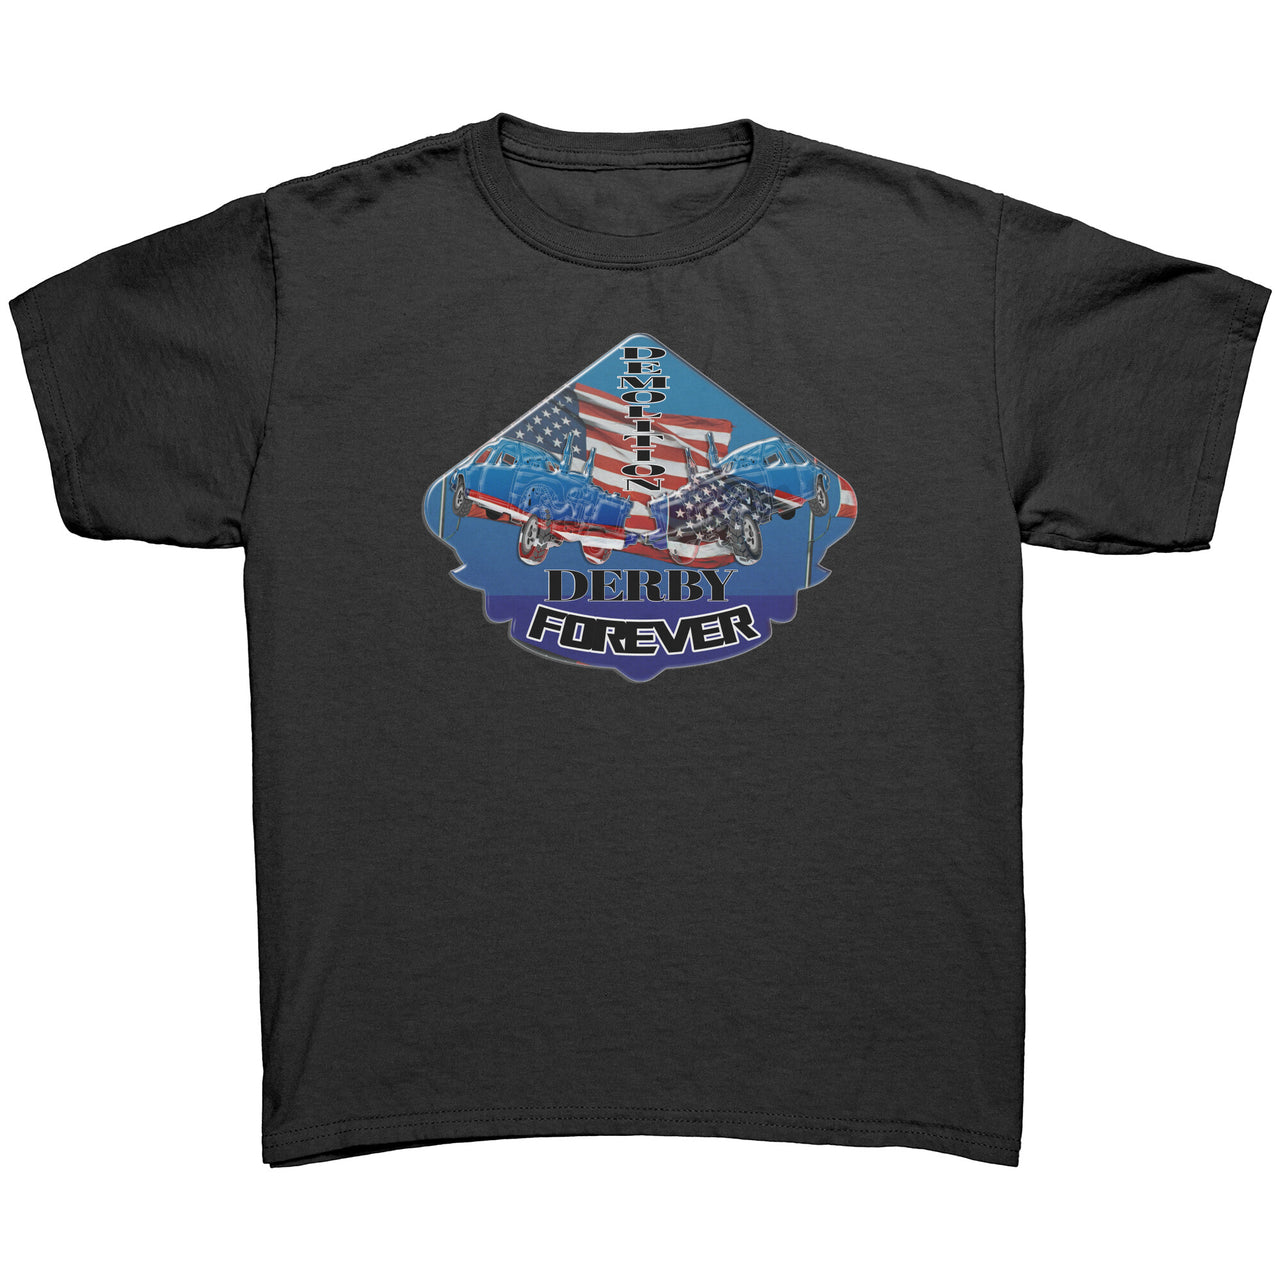 USA Demolition Derby Forever Youth T-shirts/Hoodies